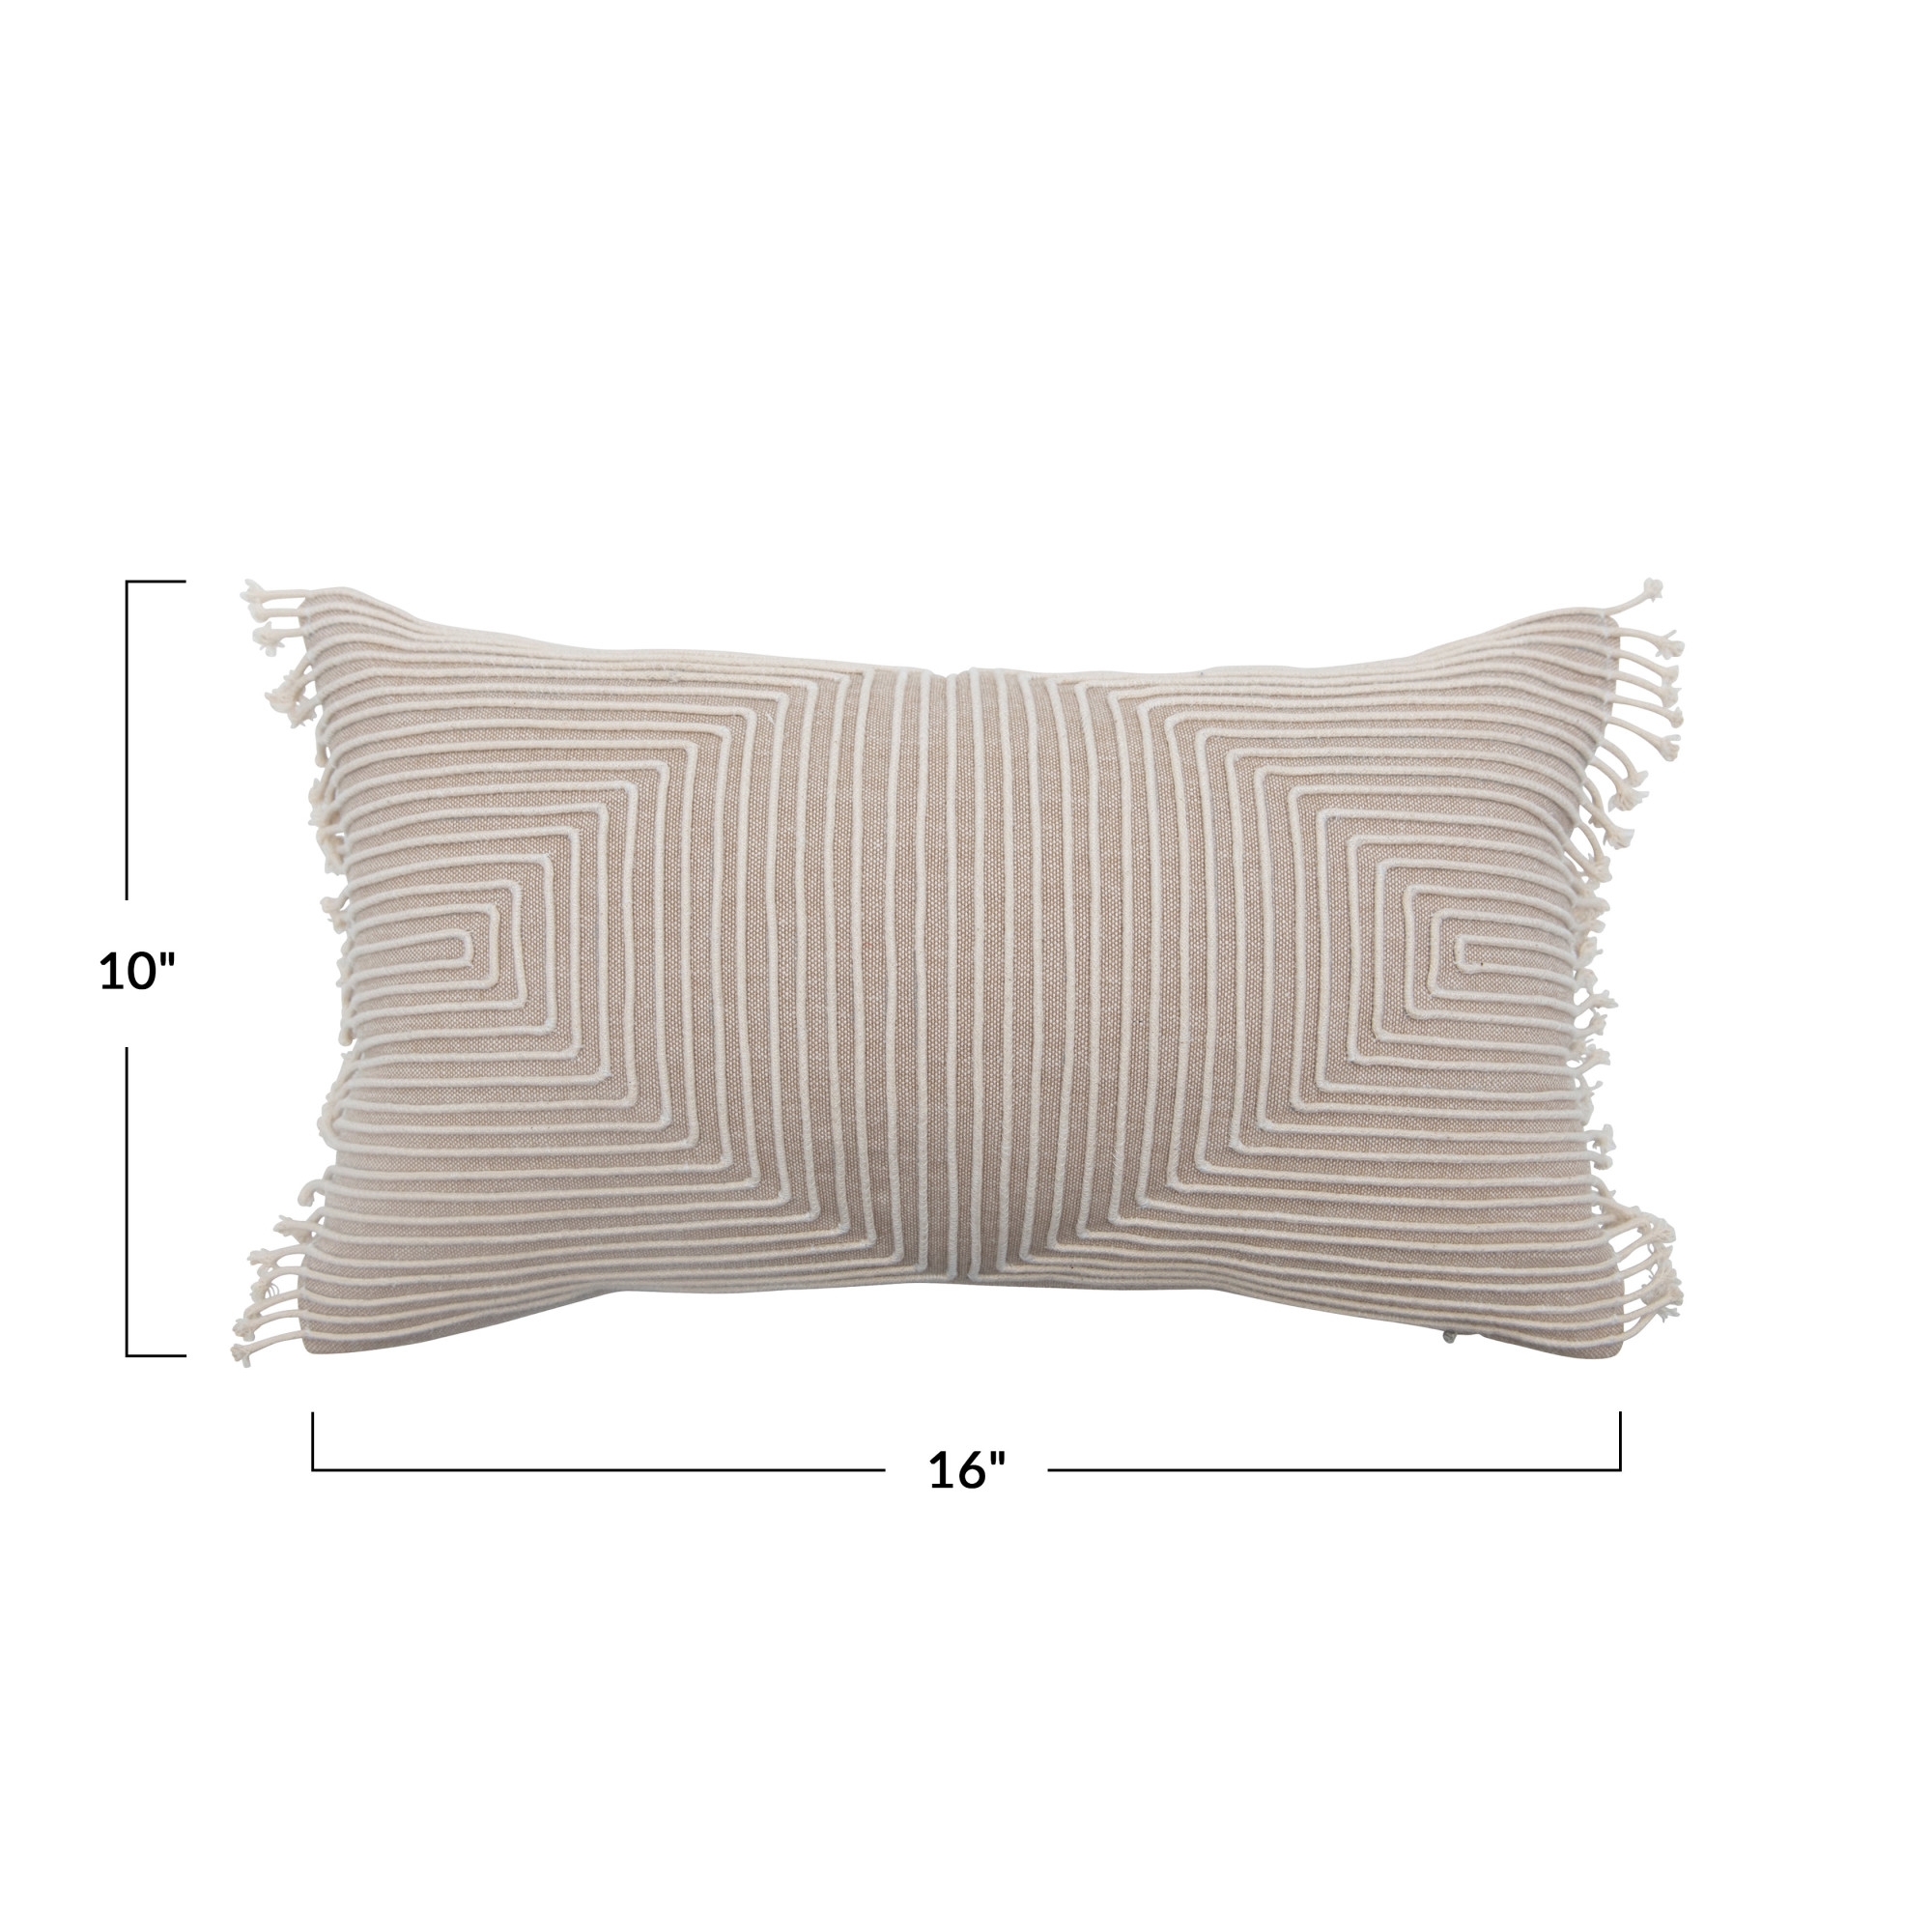 Cotton Chambray Appliqued Lumbar Pillow with Piping & Fringe - Image 4